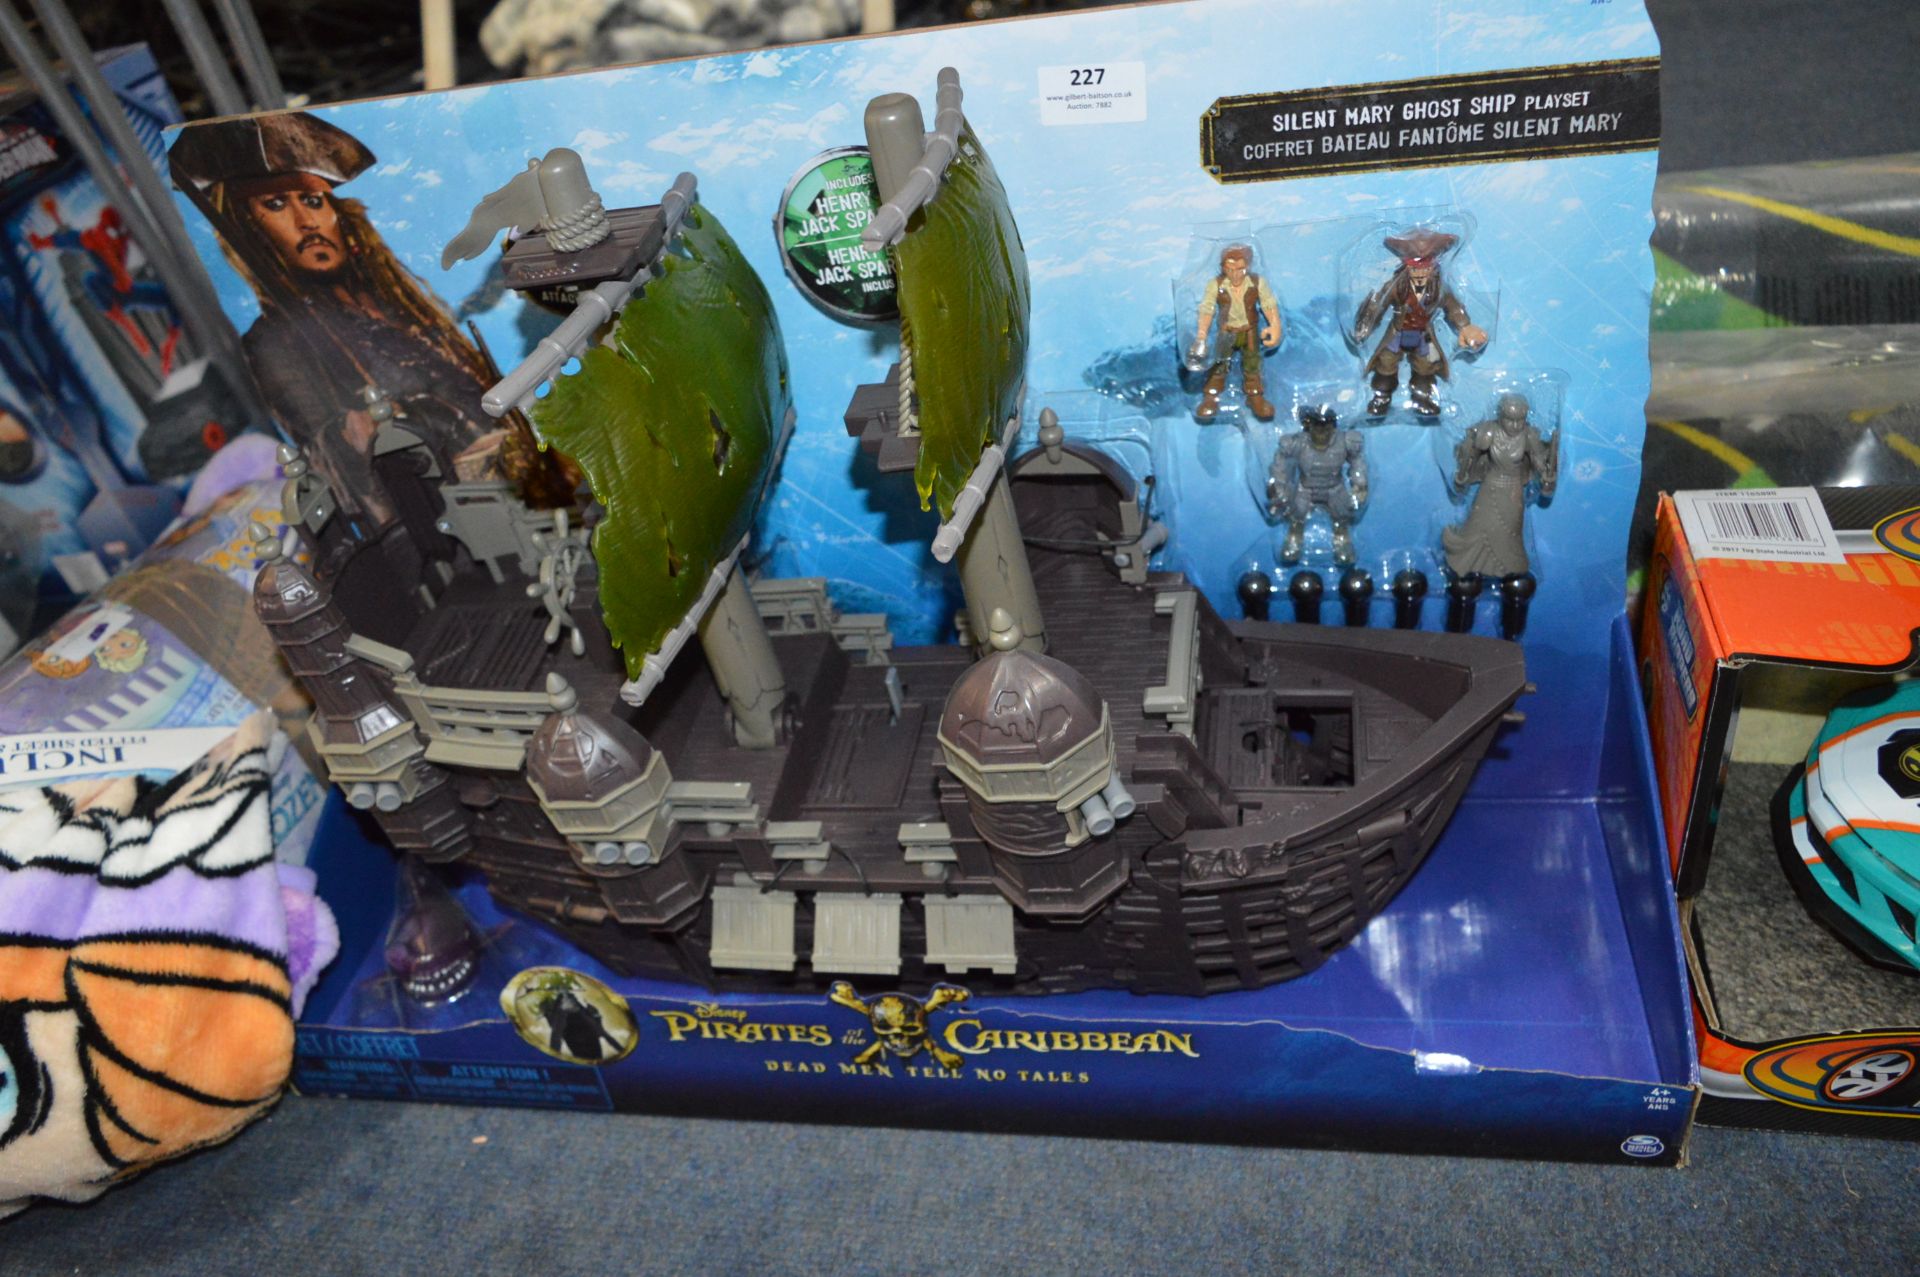 *Pirates of the Caribbean - Silent Mary Ghost Ship Playset